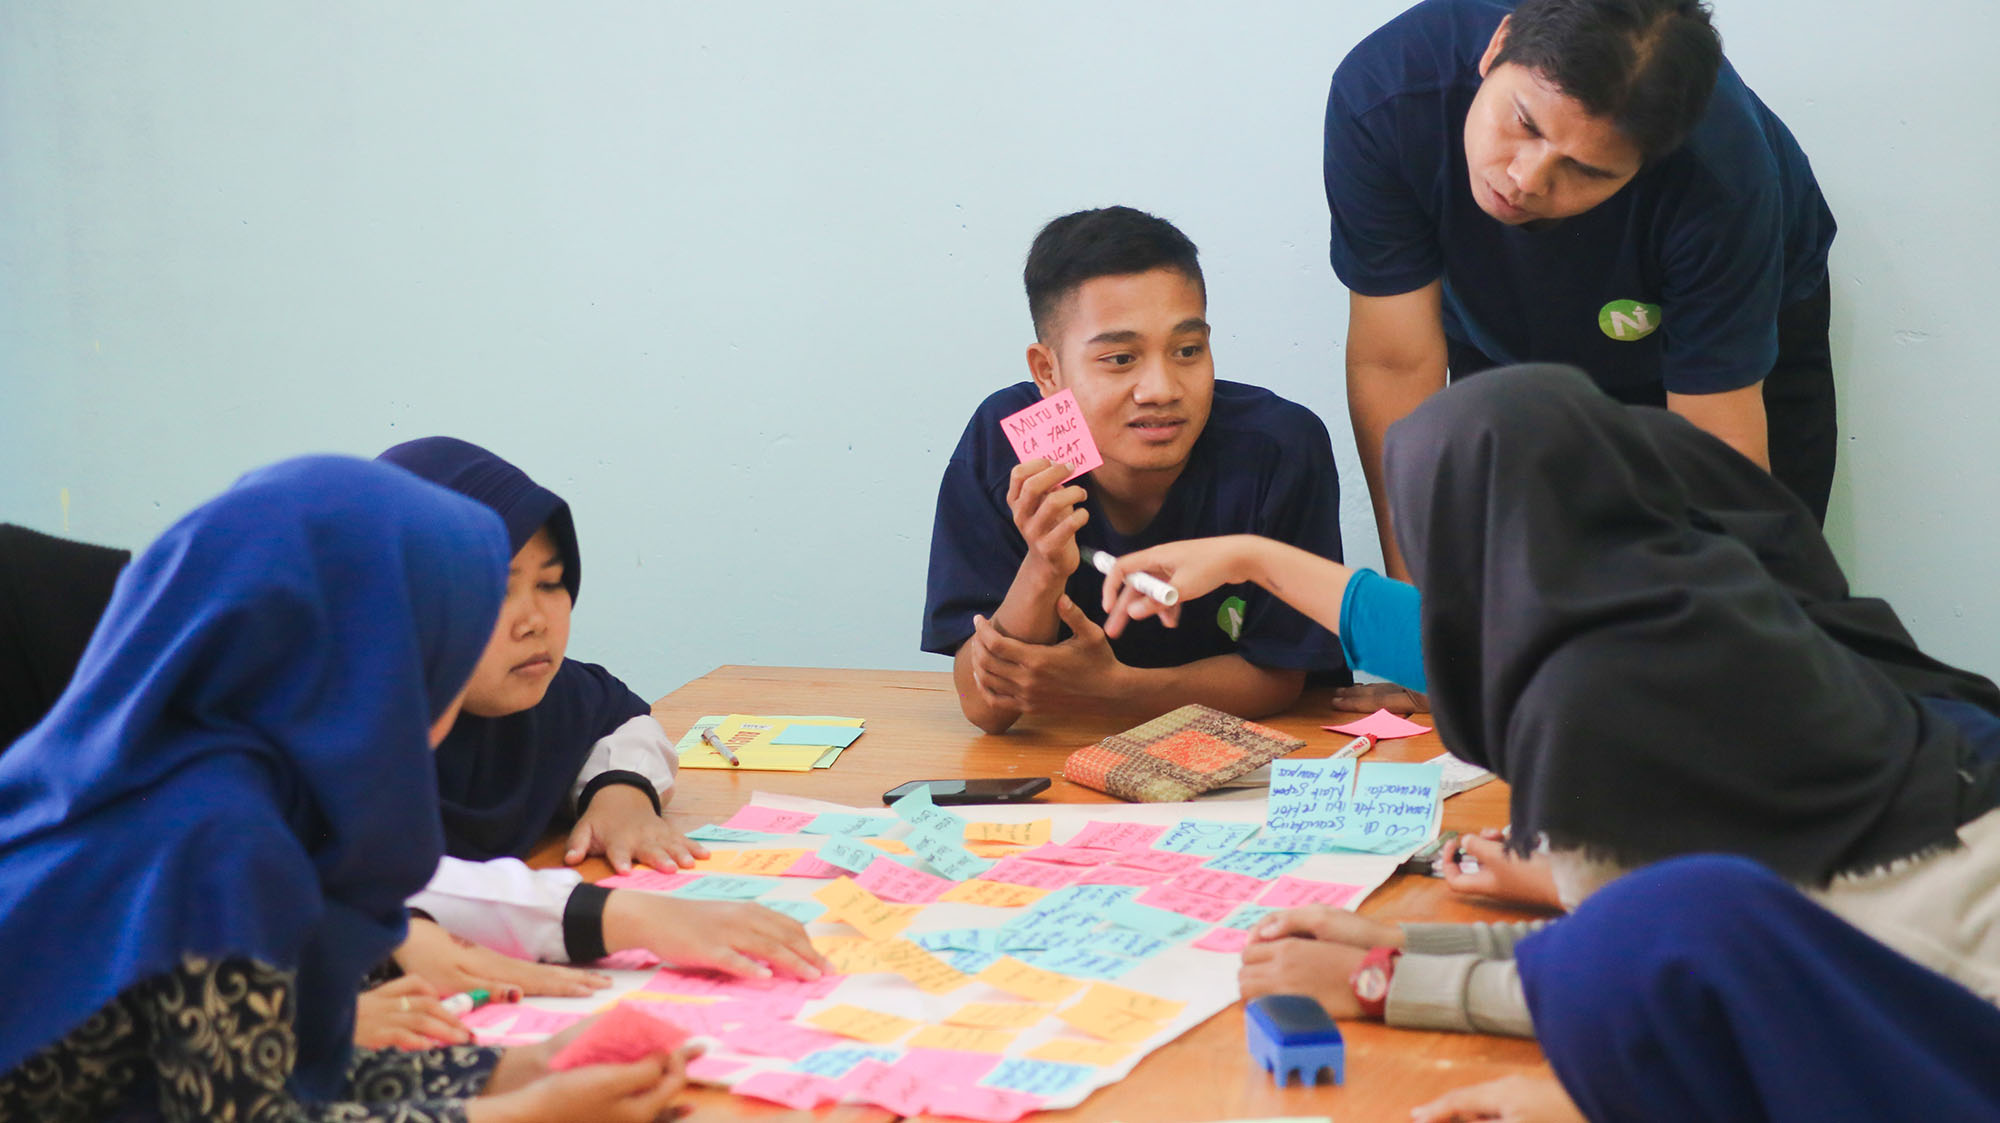 Students gathered around a table, discussing post-its assembled on a large paper.